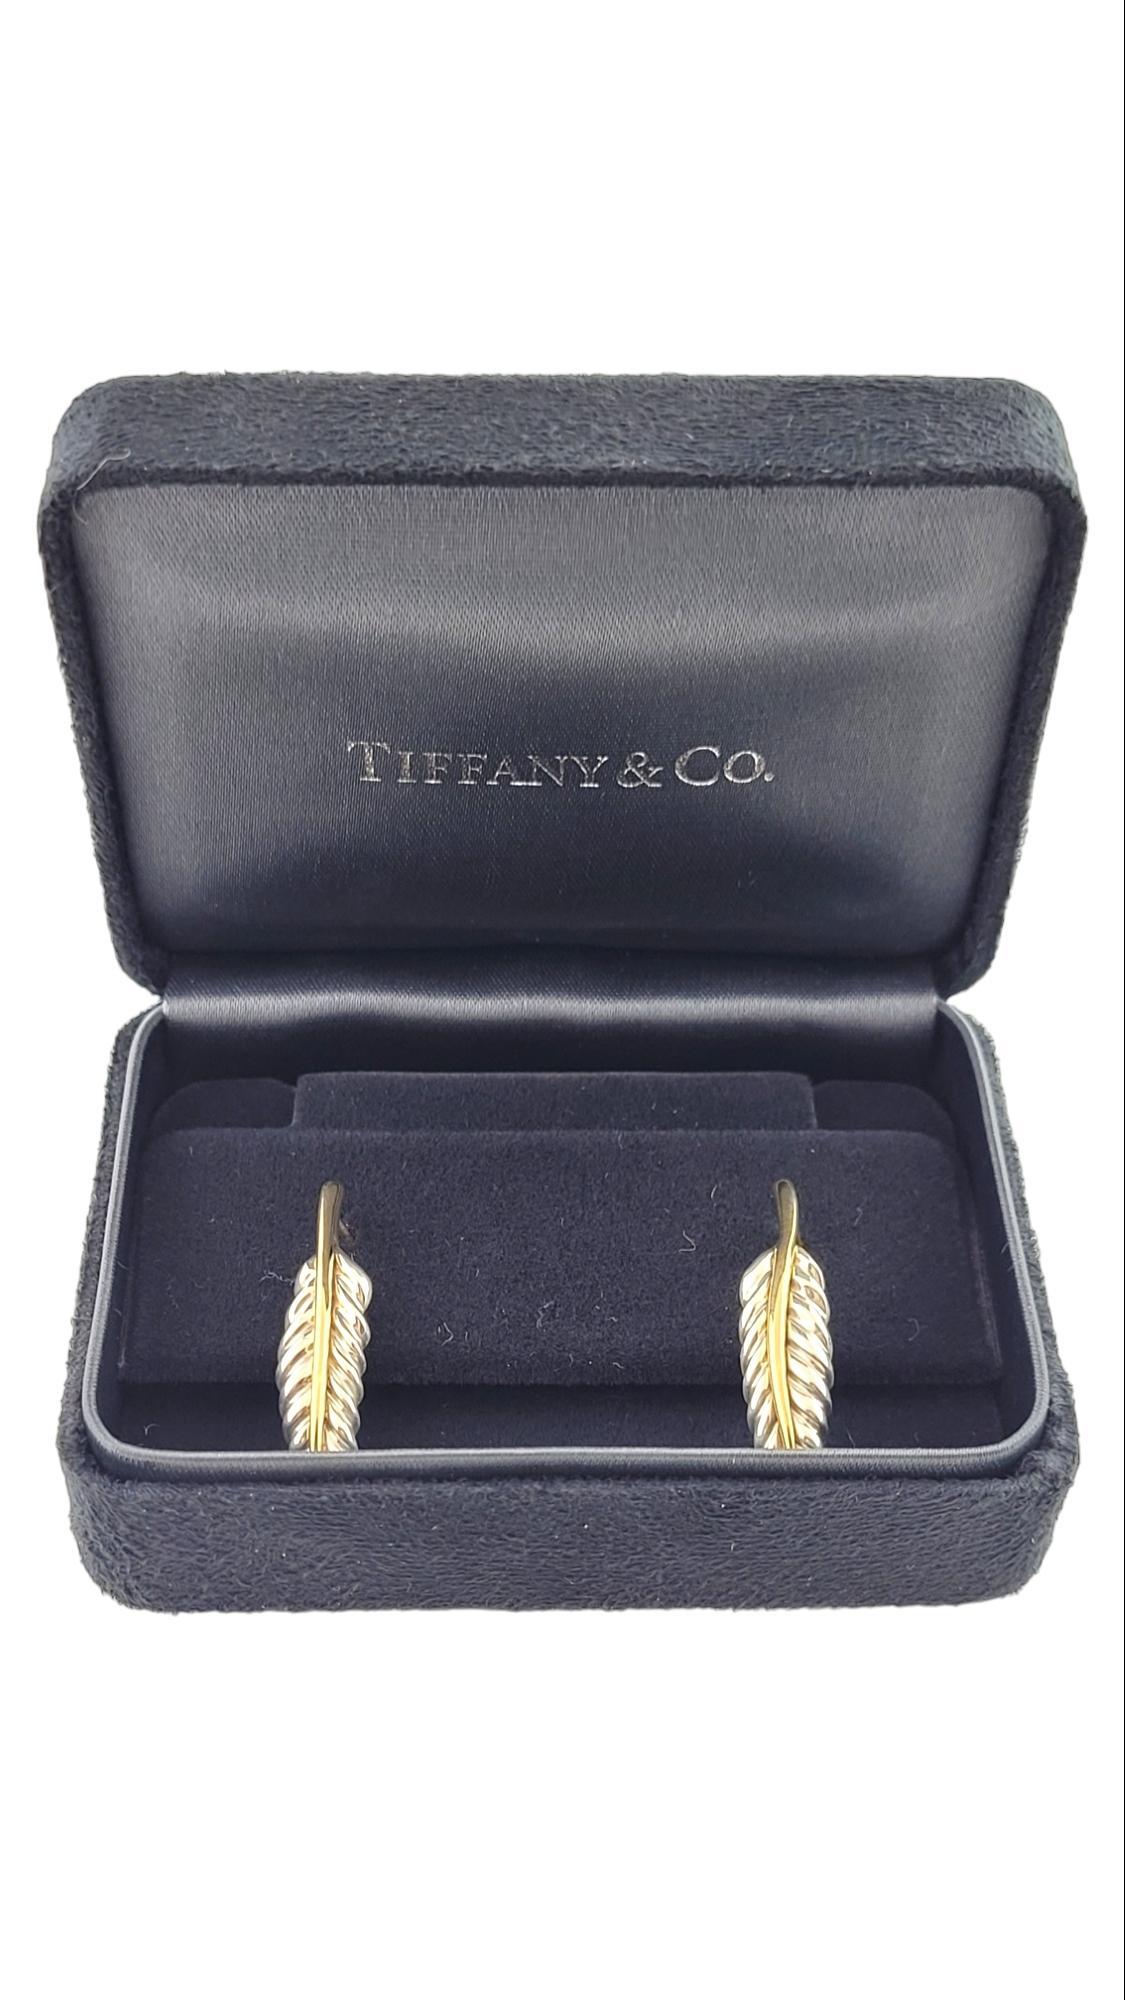 Tiffany & Co. Sterling Silver 18K Yellow Gold Feather Earrings #15834 2